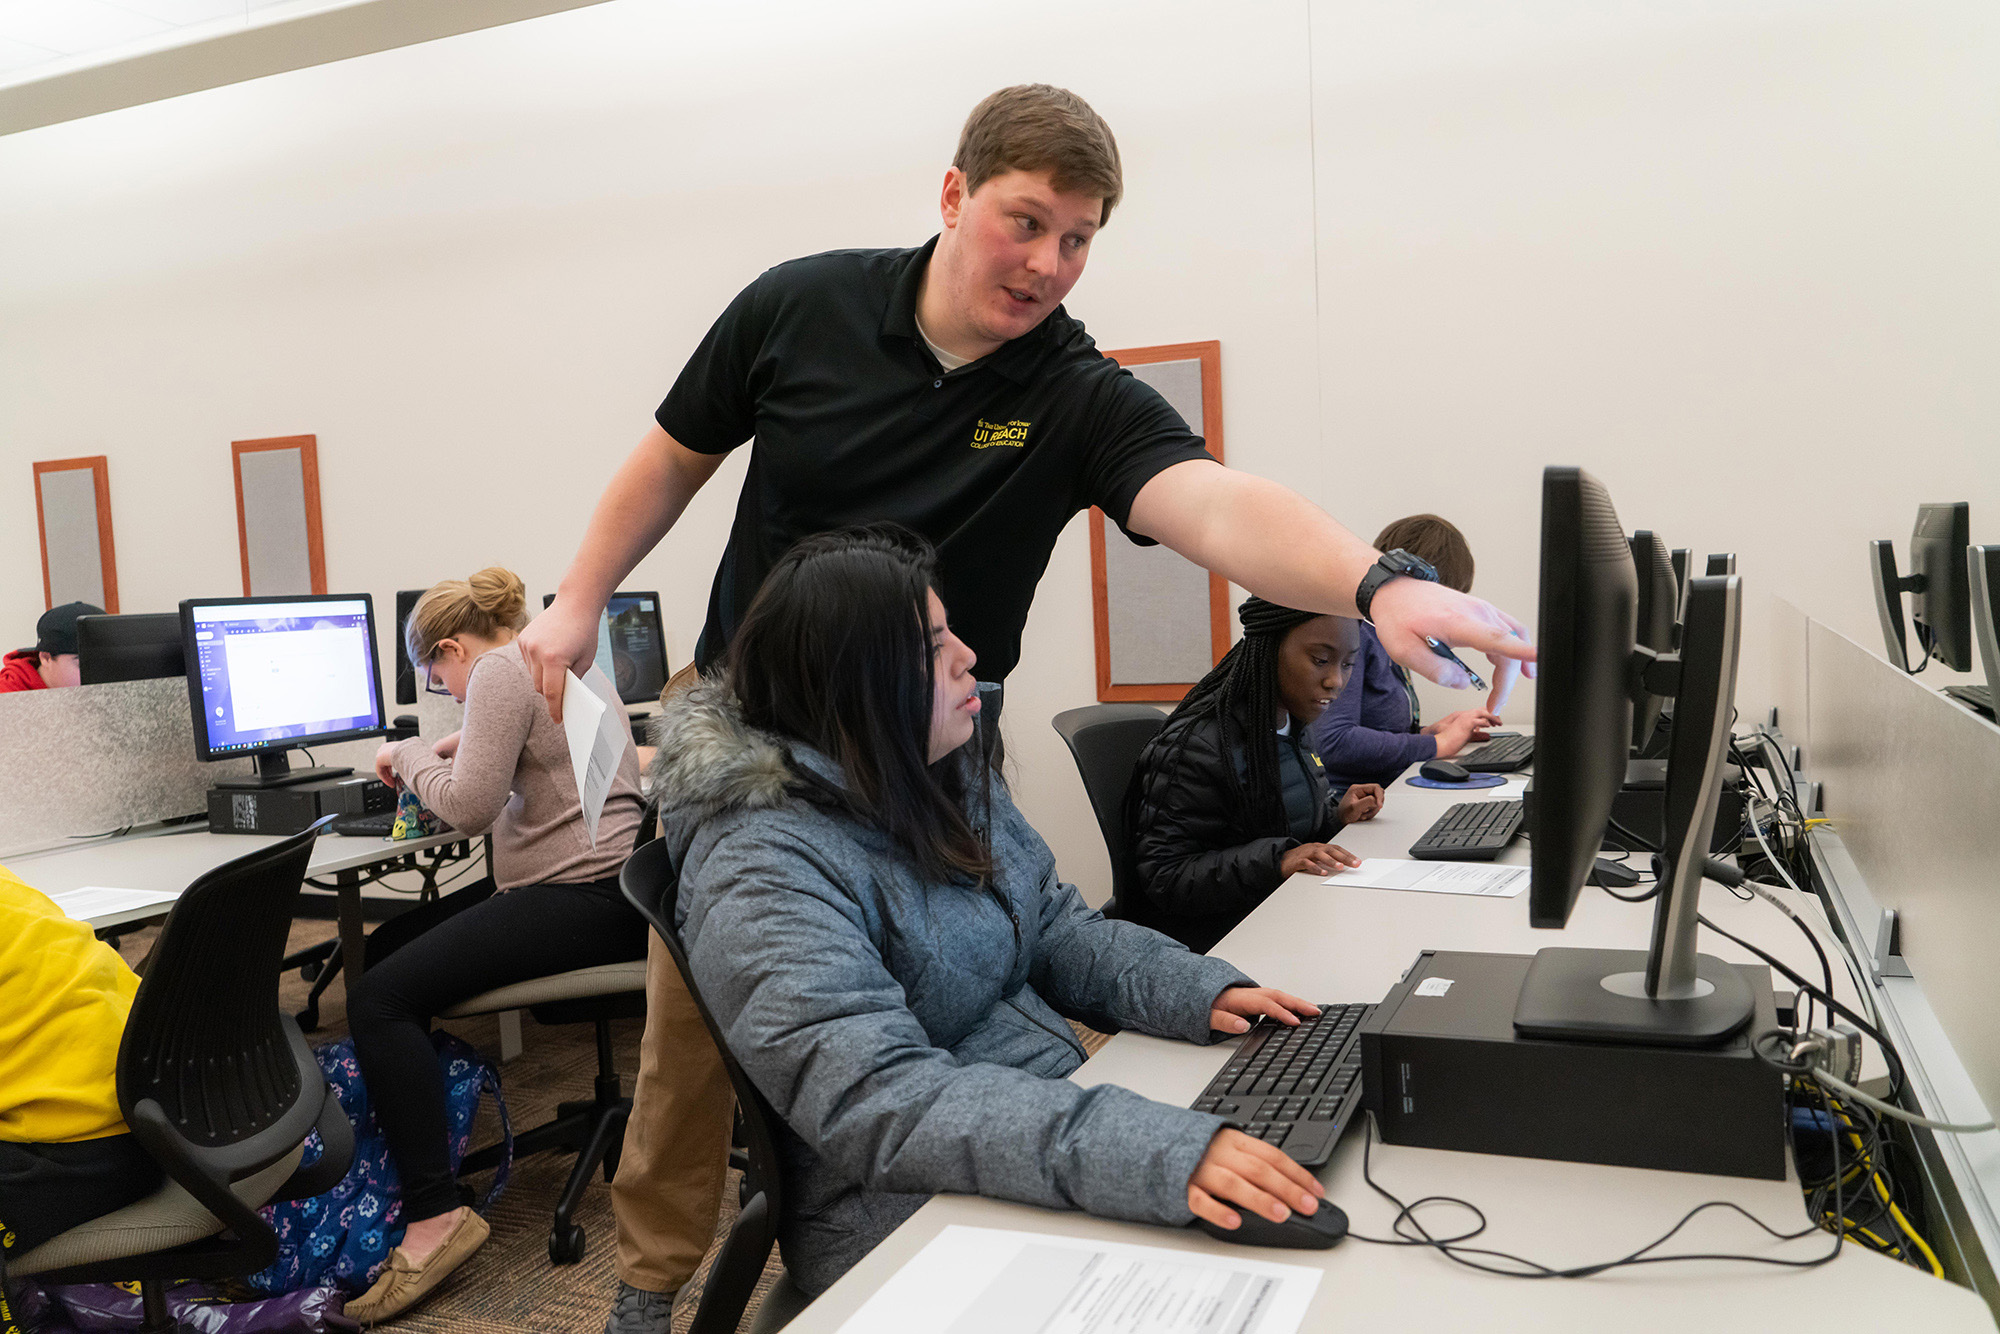 UI reach person helping student in computer lab